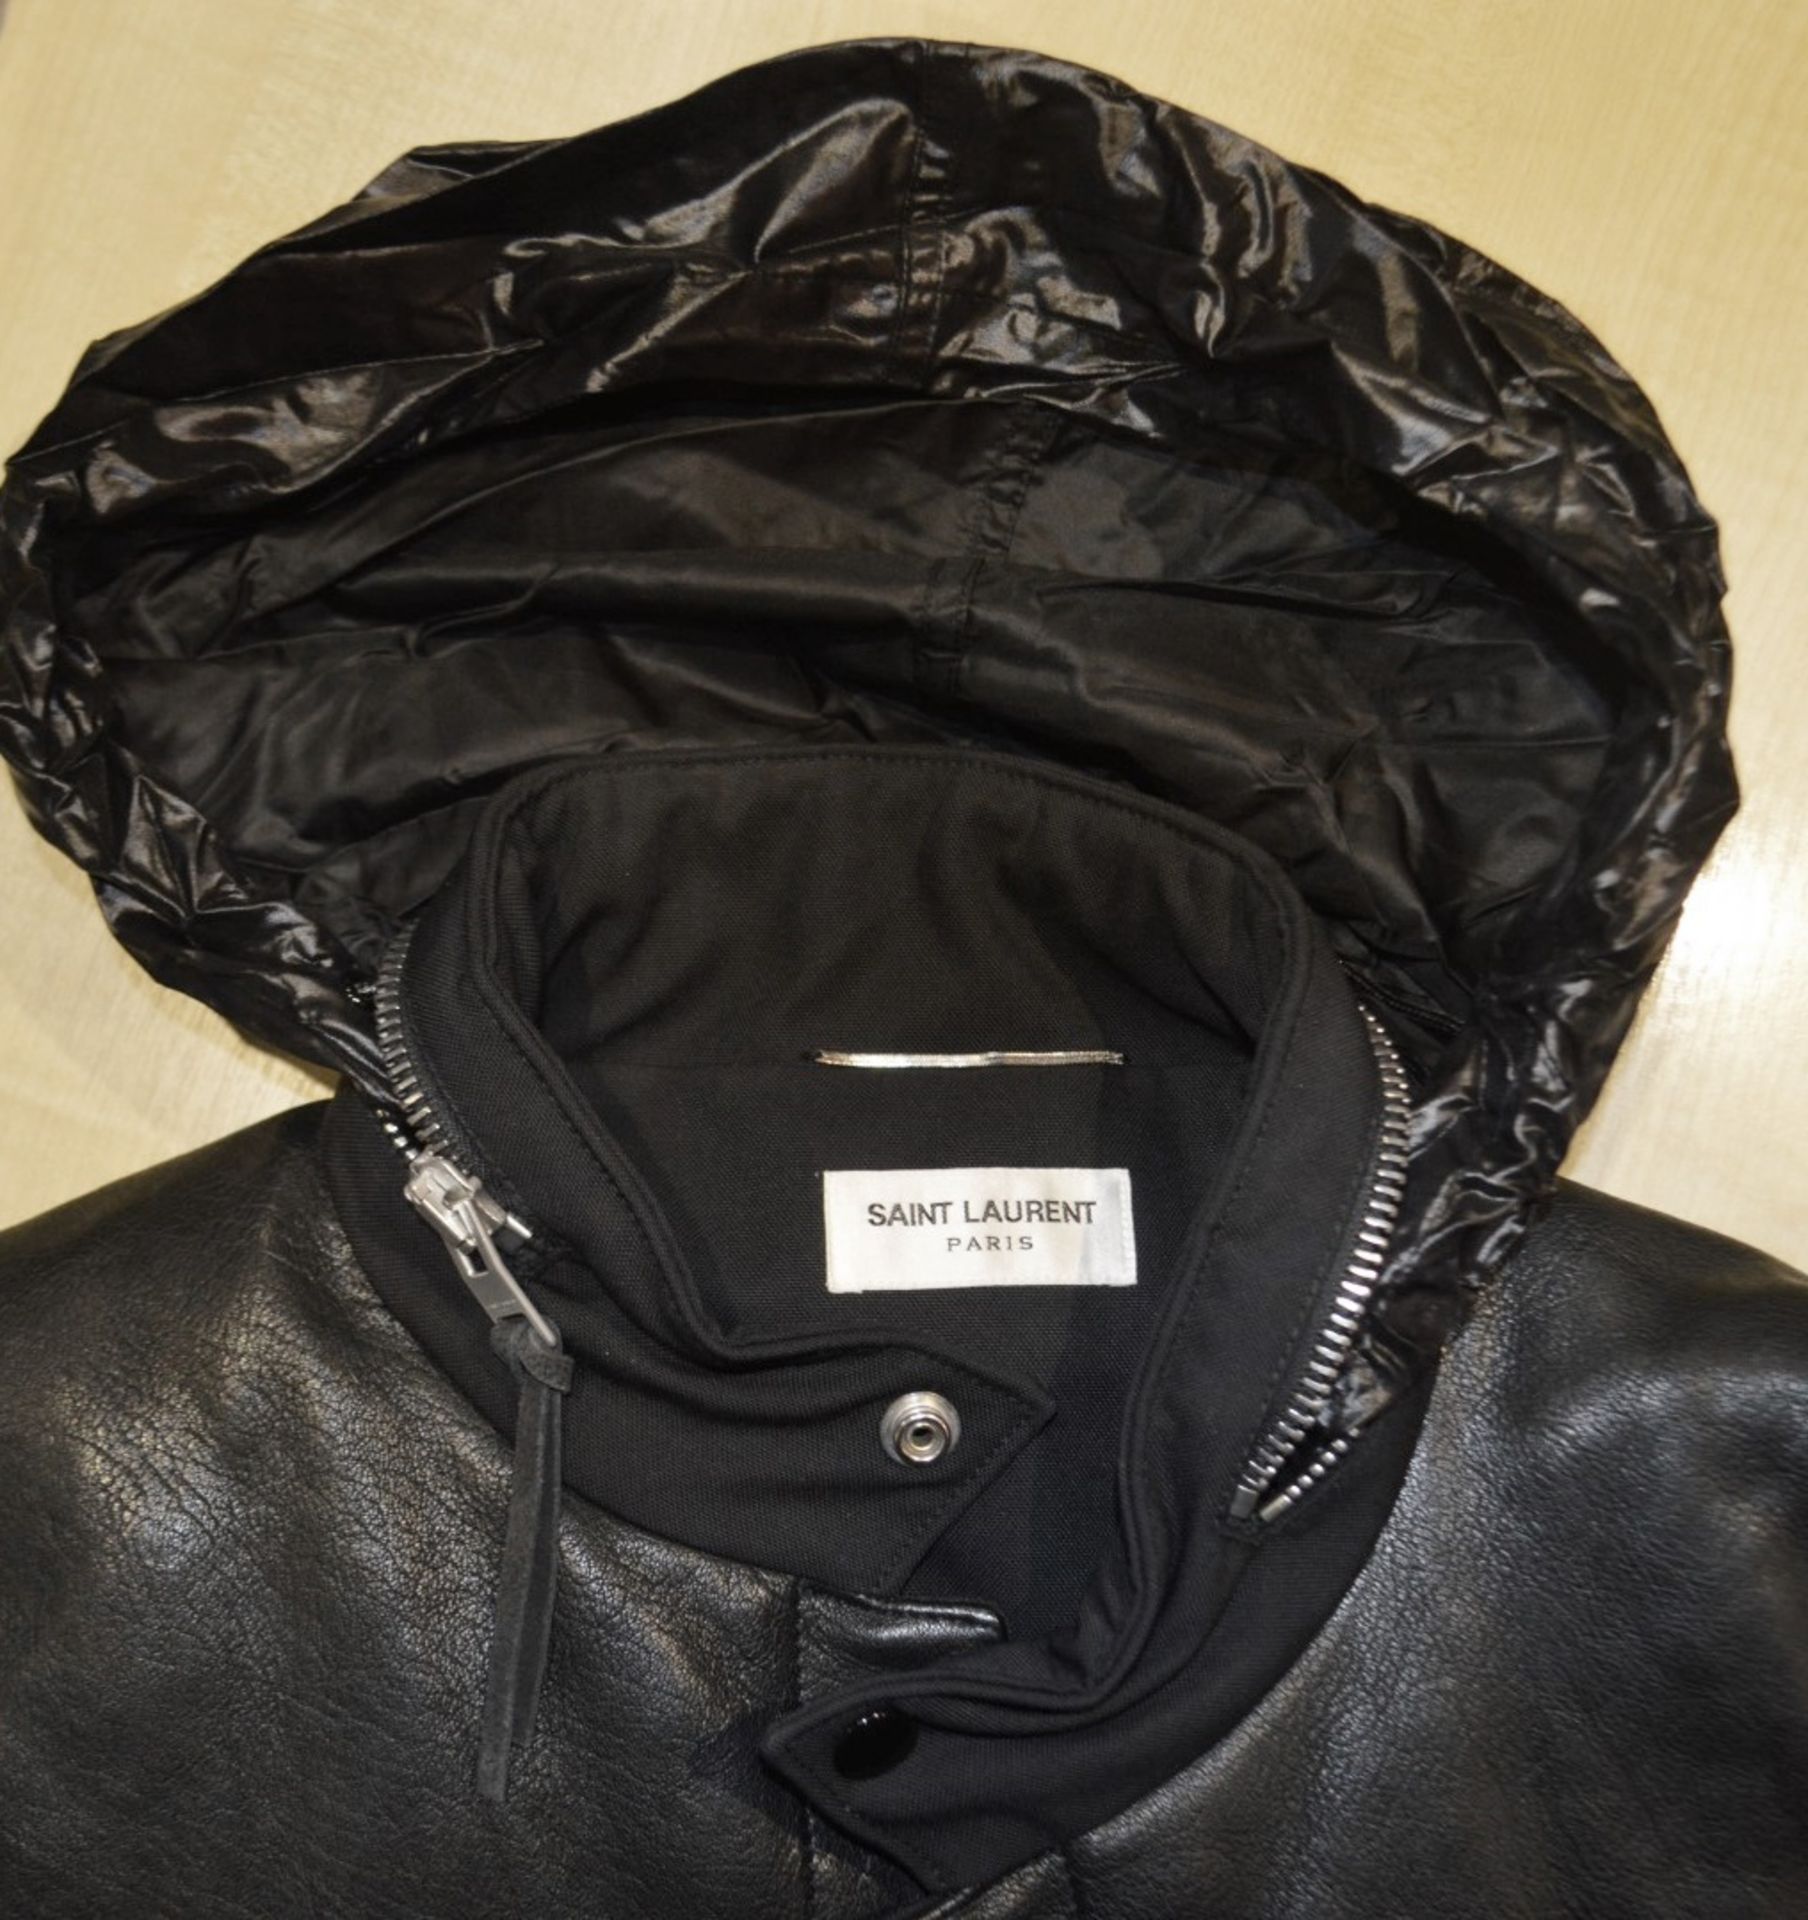 1 x Men's Genuine Yves Saint Laurant Gillet / Body Warmer In Black With Leather Panelling - Image 3 of 8